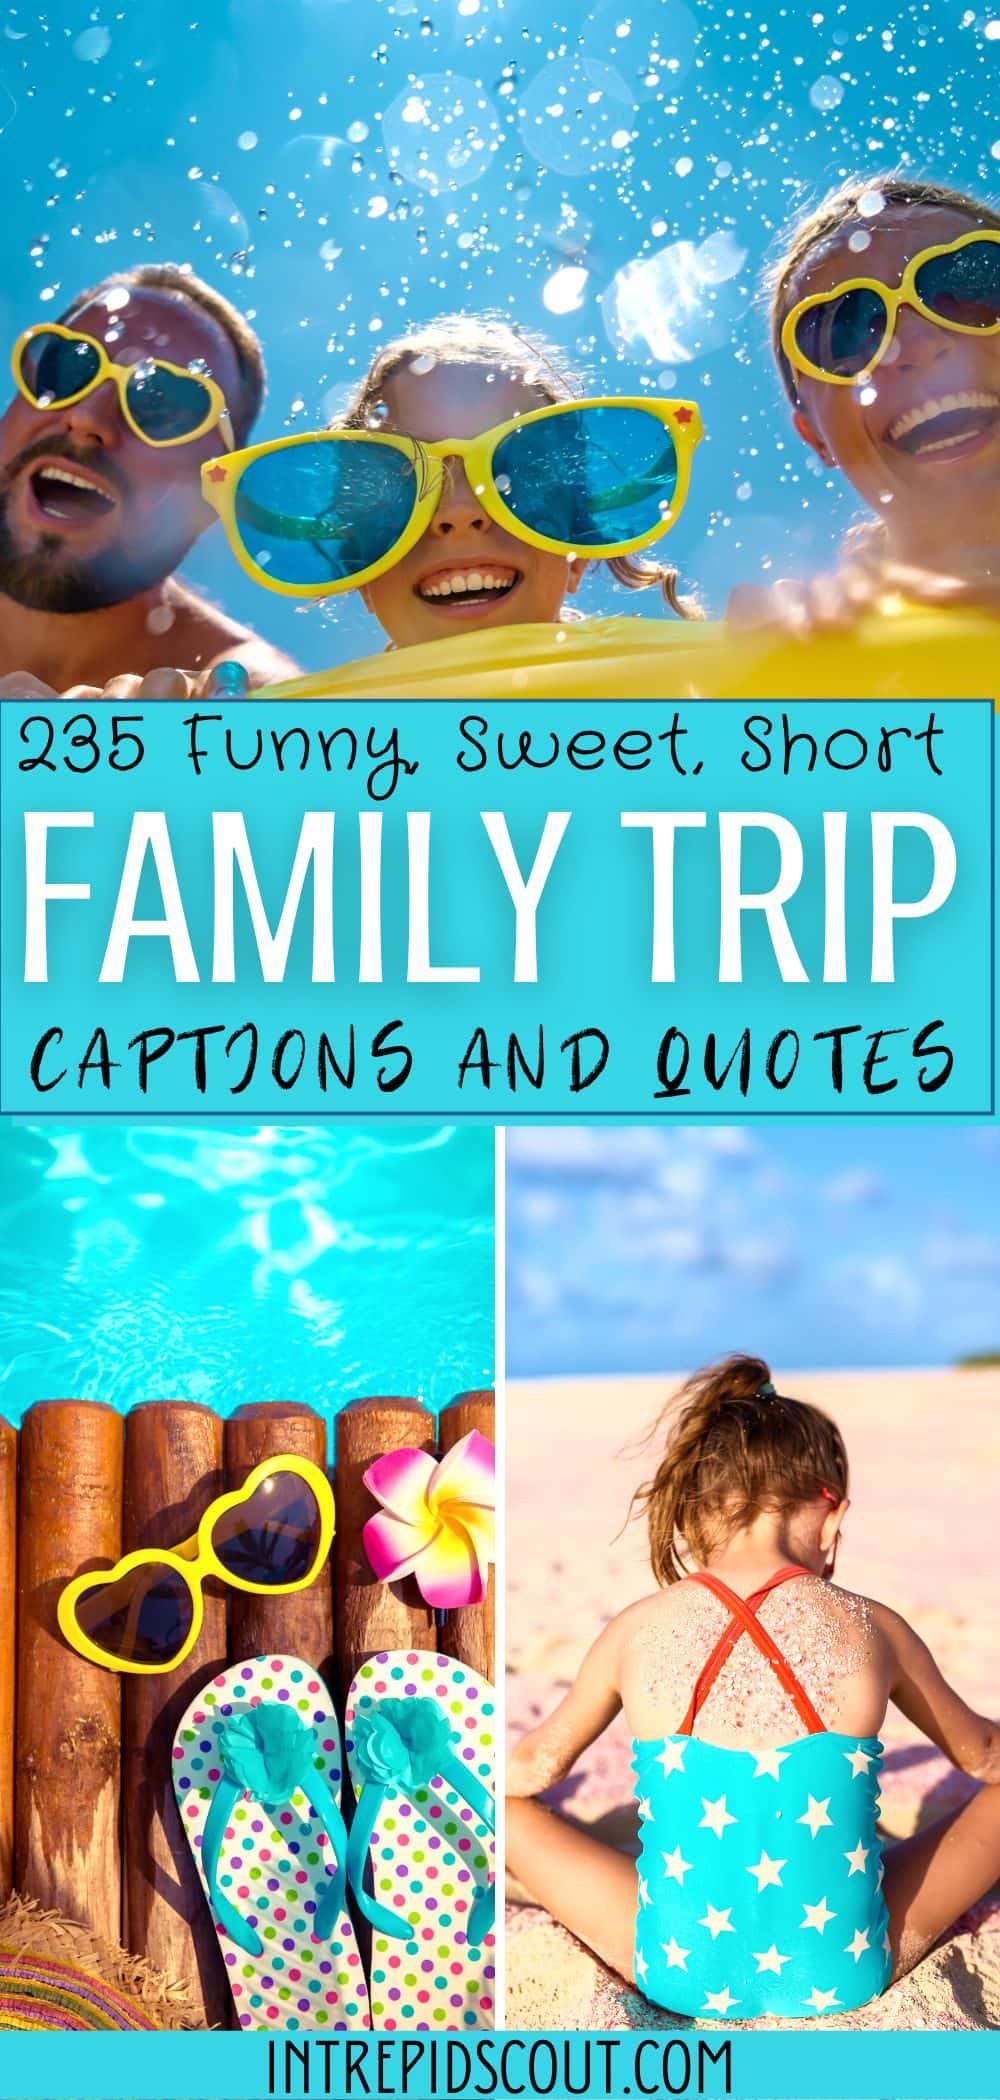 dysfunctional family holiday quotes